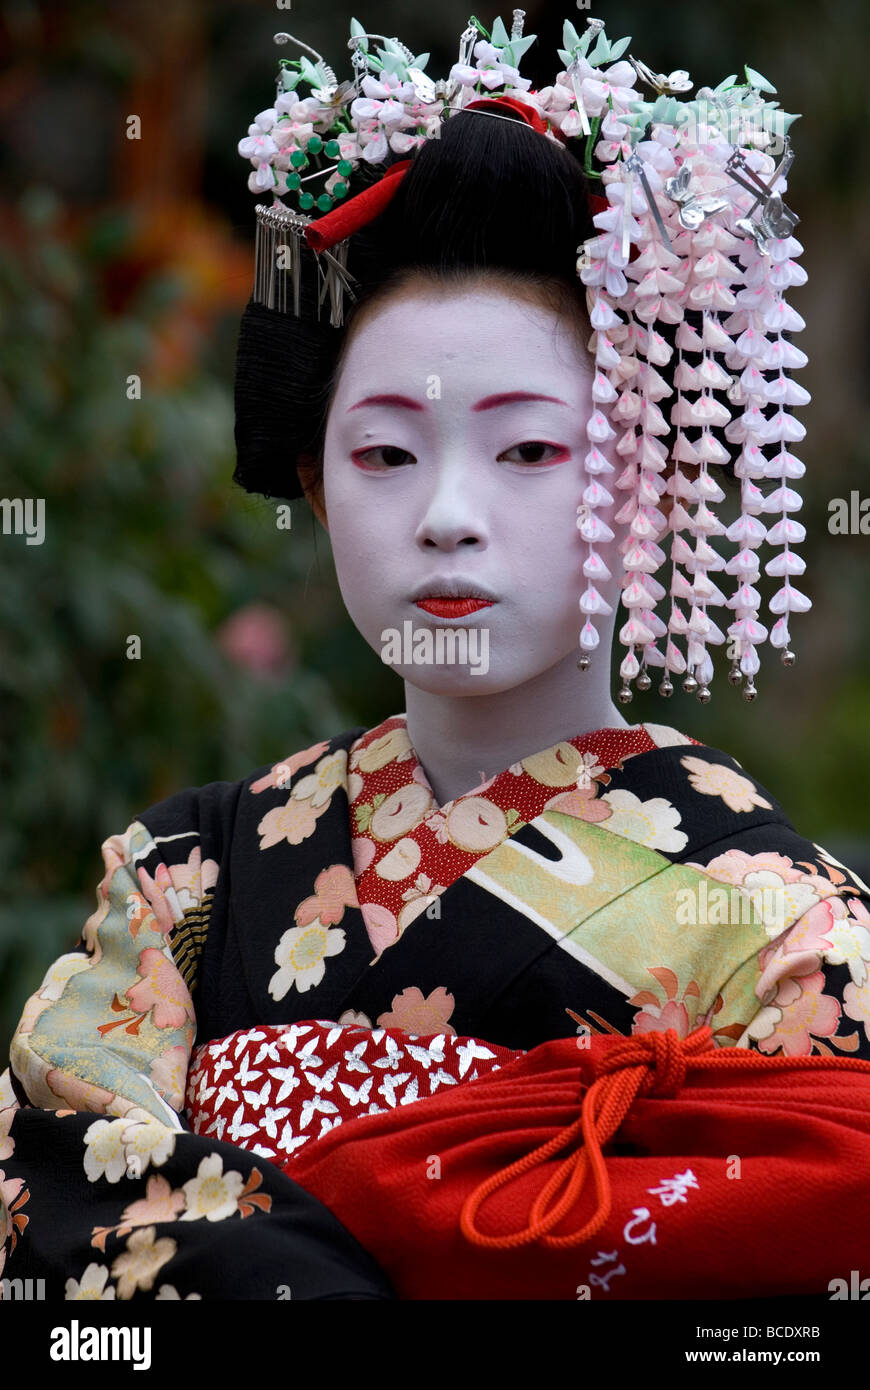 A young maiko or geisha apprentice with spring season kanzashi decorations in her hair poses for a portrait photo Stock Photo